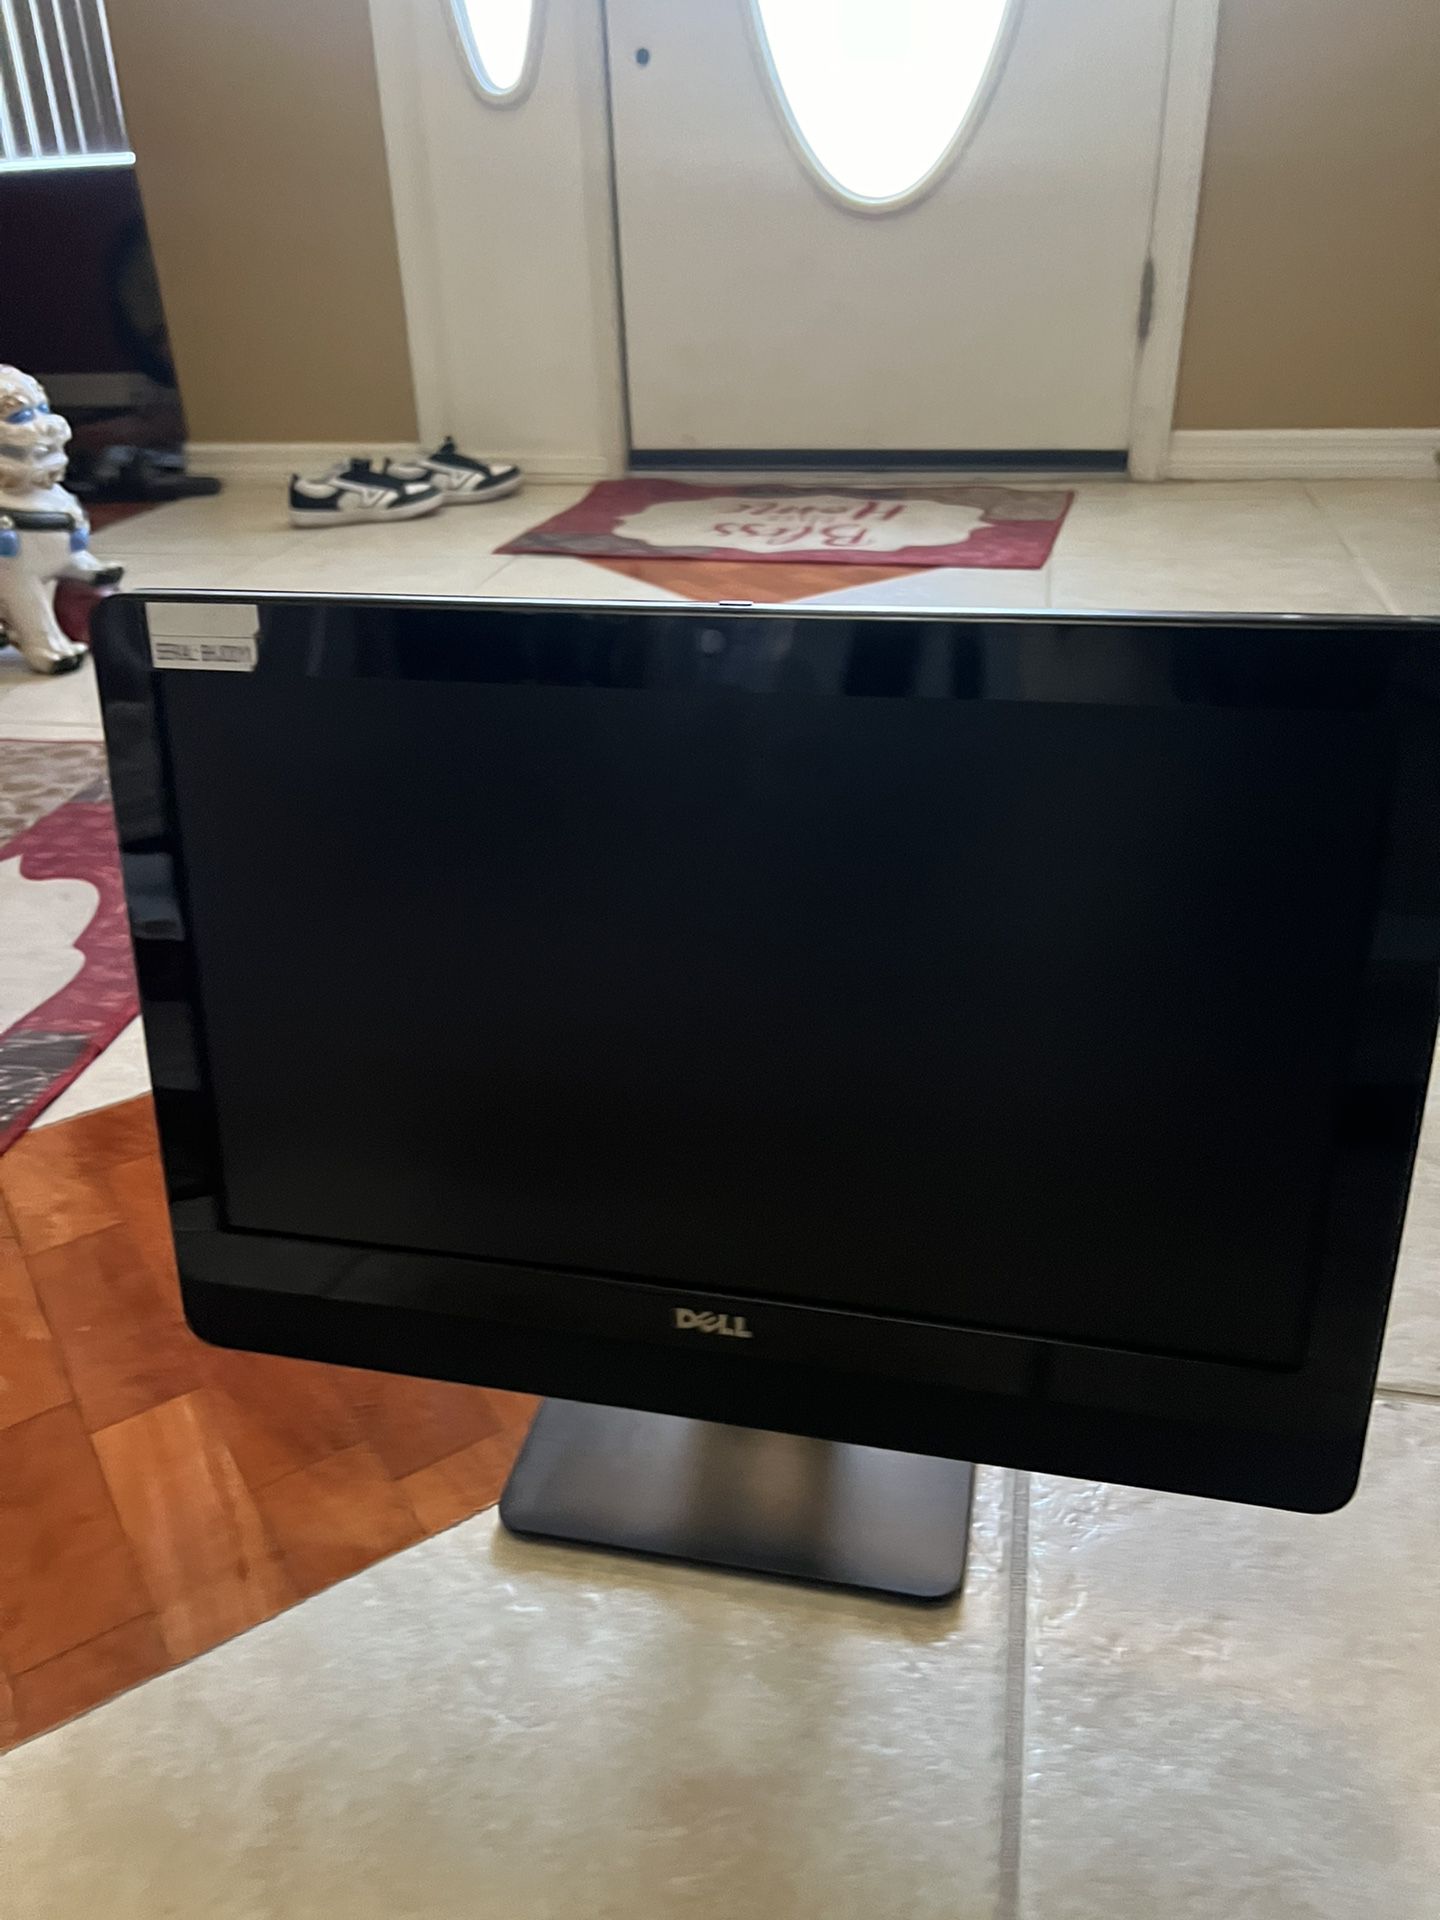 Dell Inspiron 20 Model 3045 All-in-one Computer_amd A4-5000 Apu 1.50